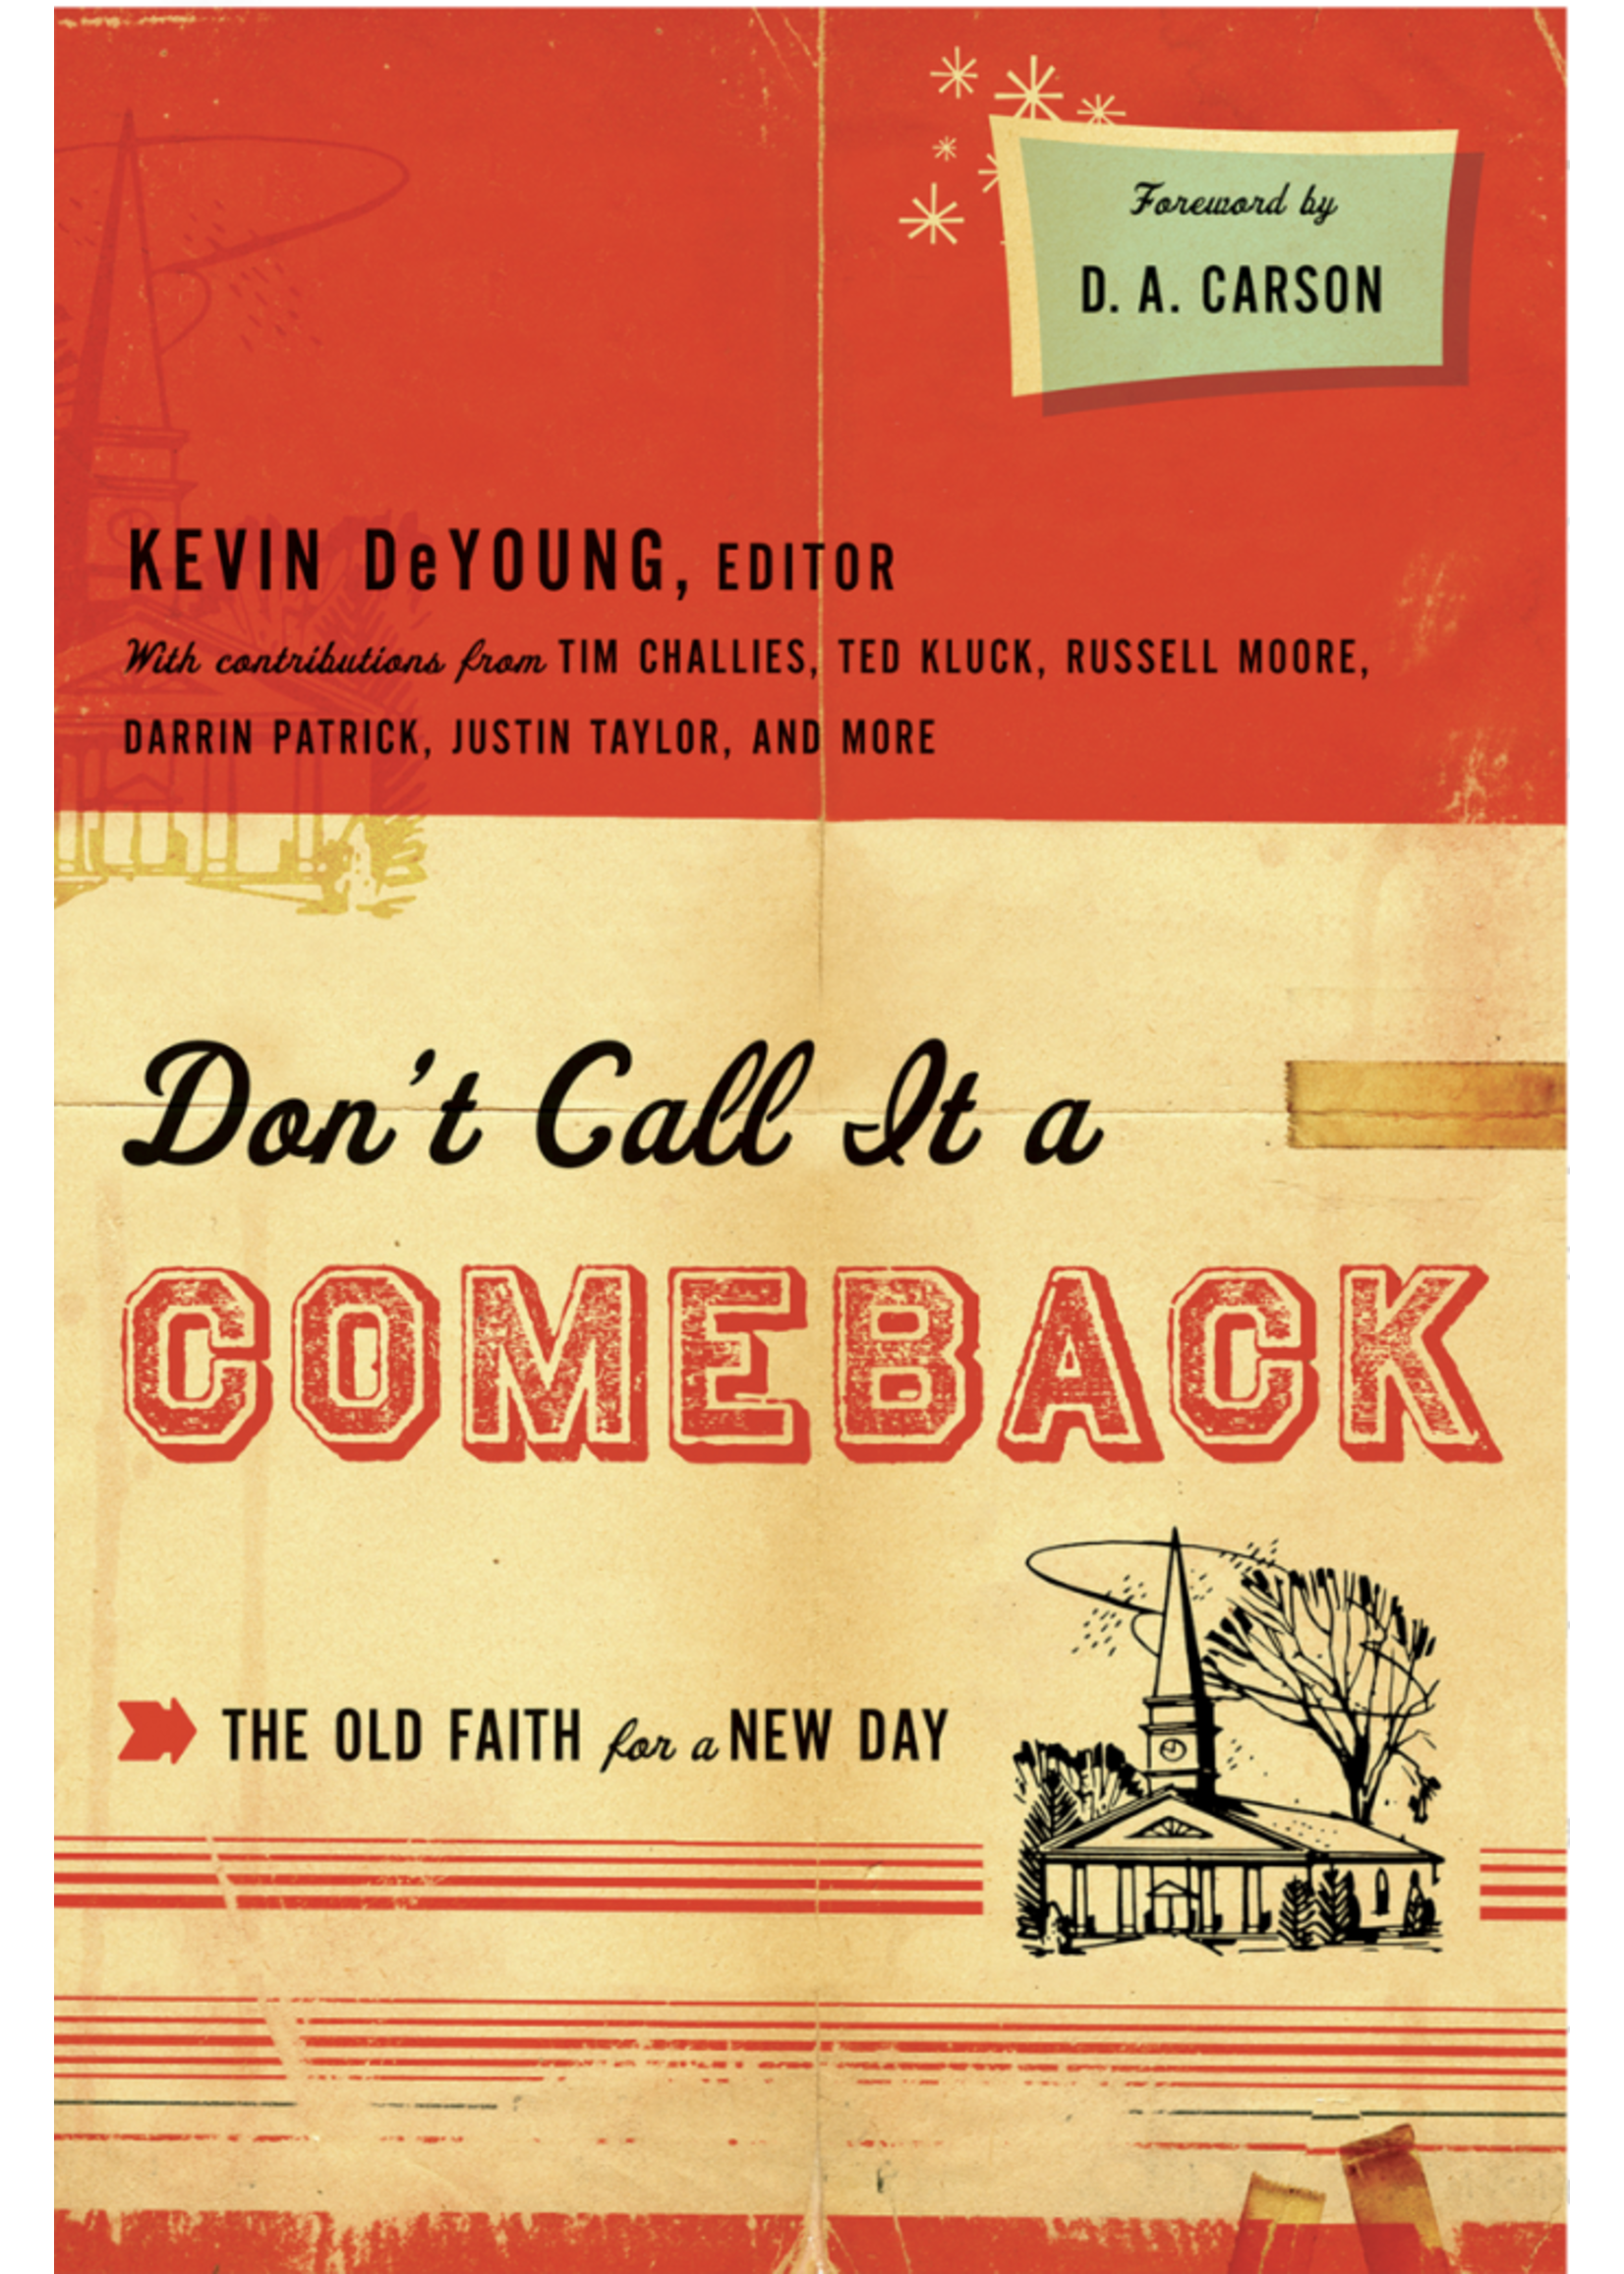 DeYoung, Kevin Don't Call It a Comeback: The Old Faith for a New Day [Kevin DeYoung]